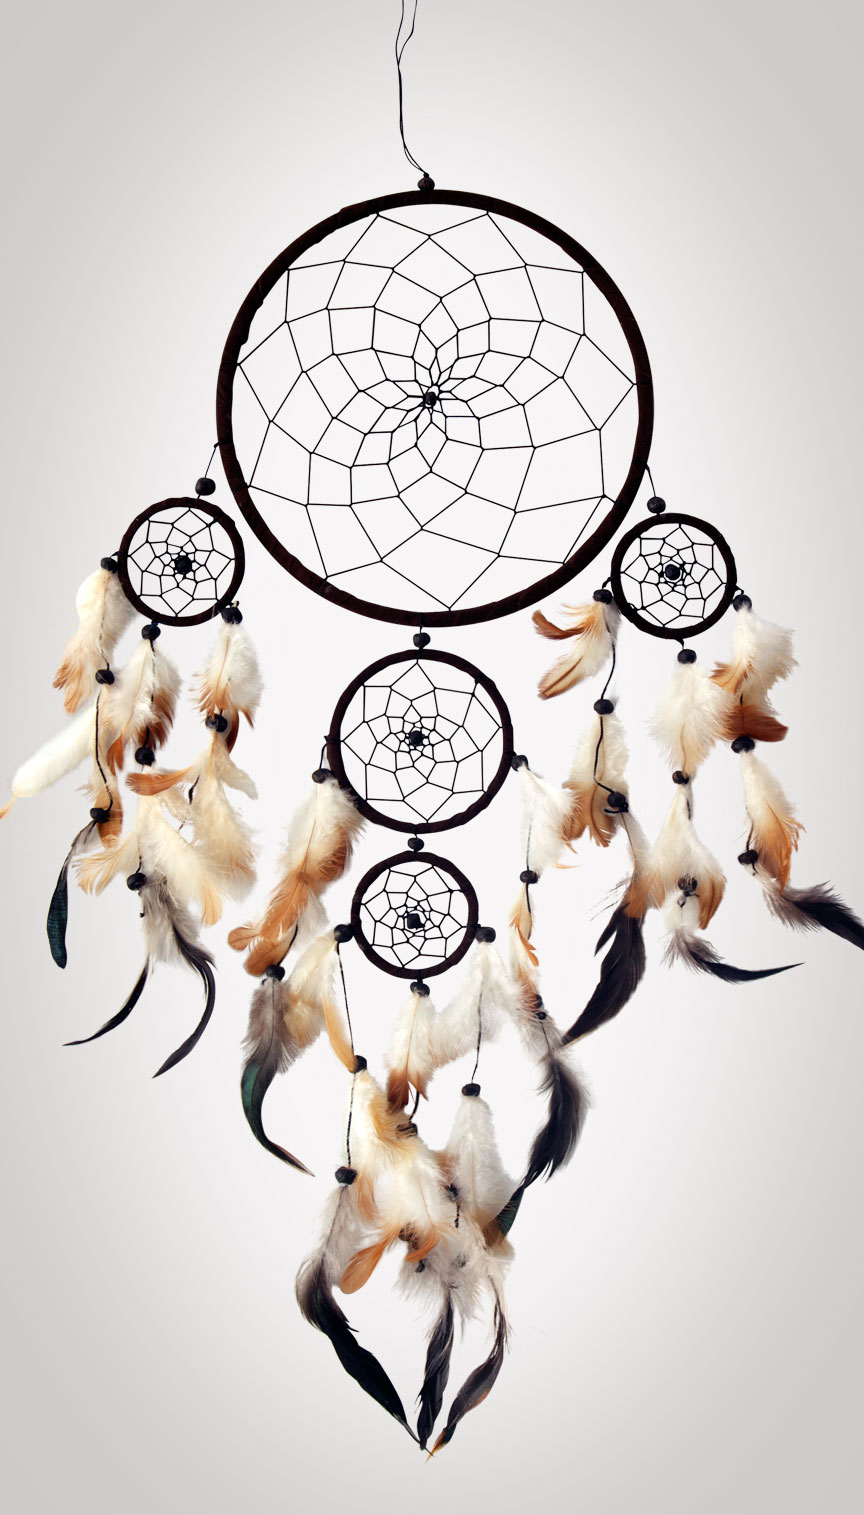 Shows an image of our dreamcatcher owg011